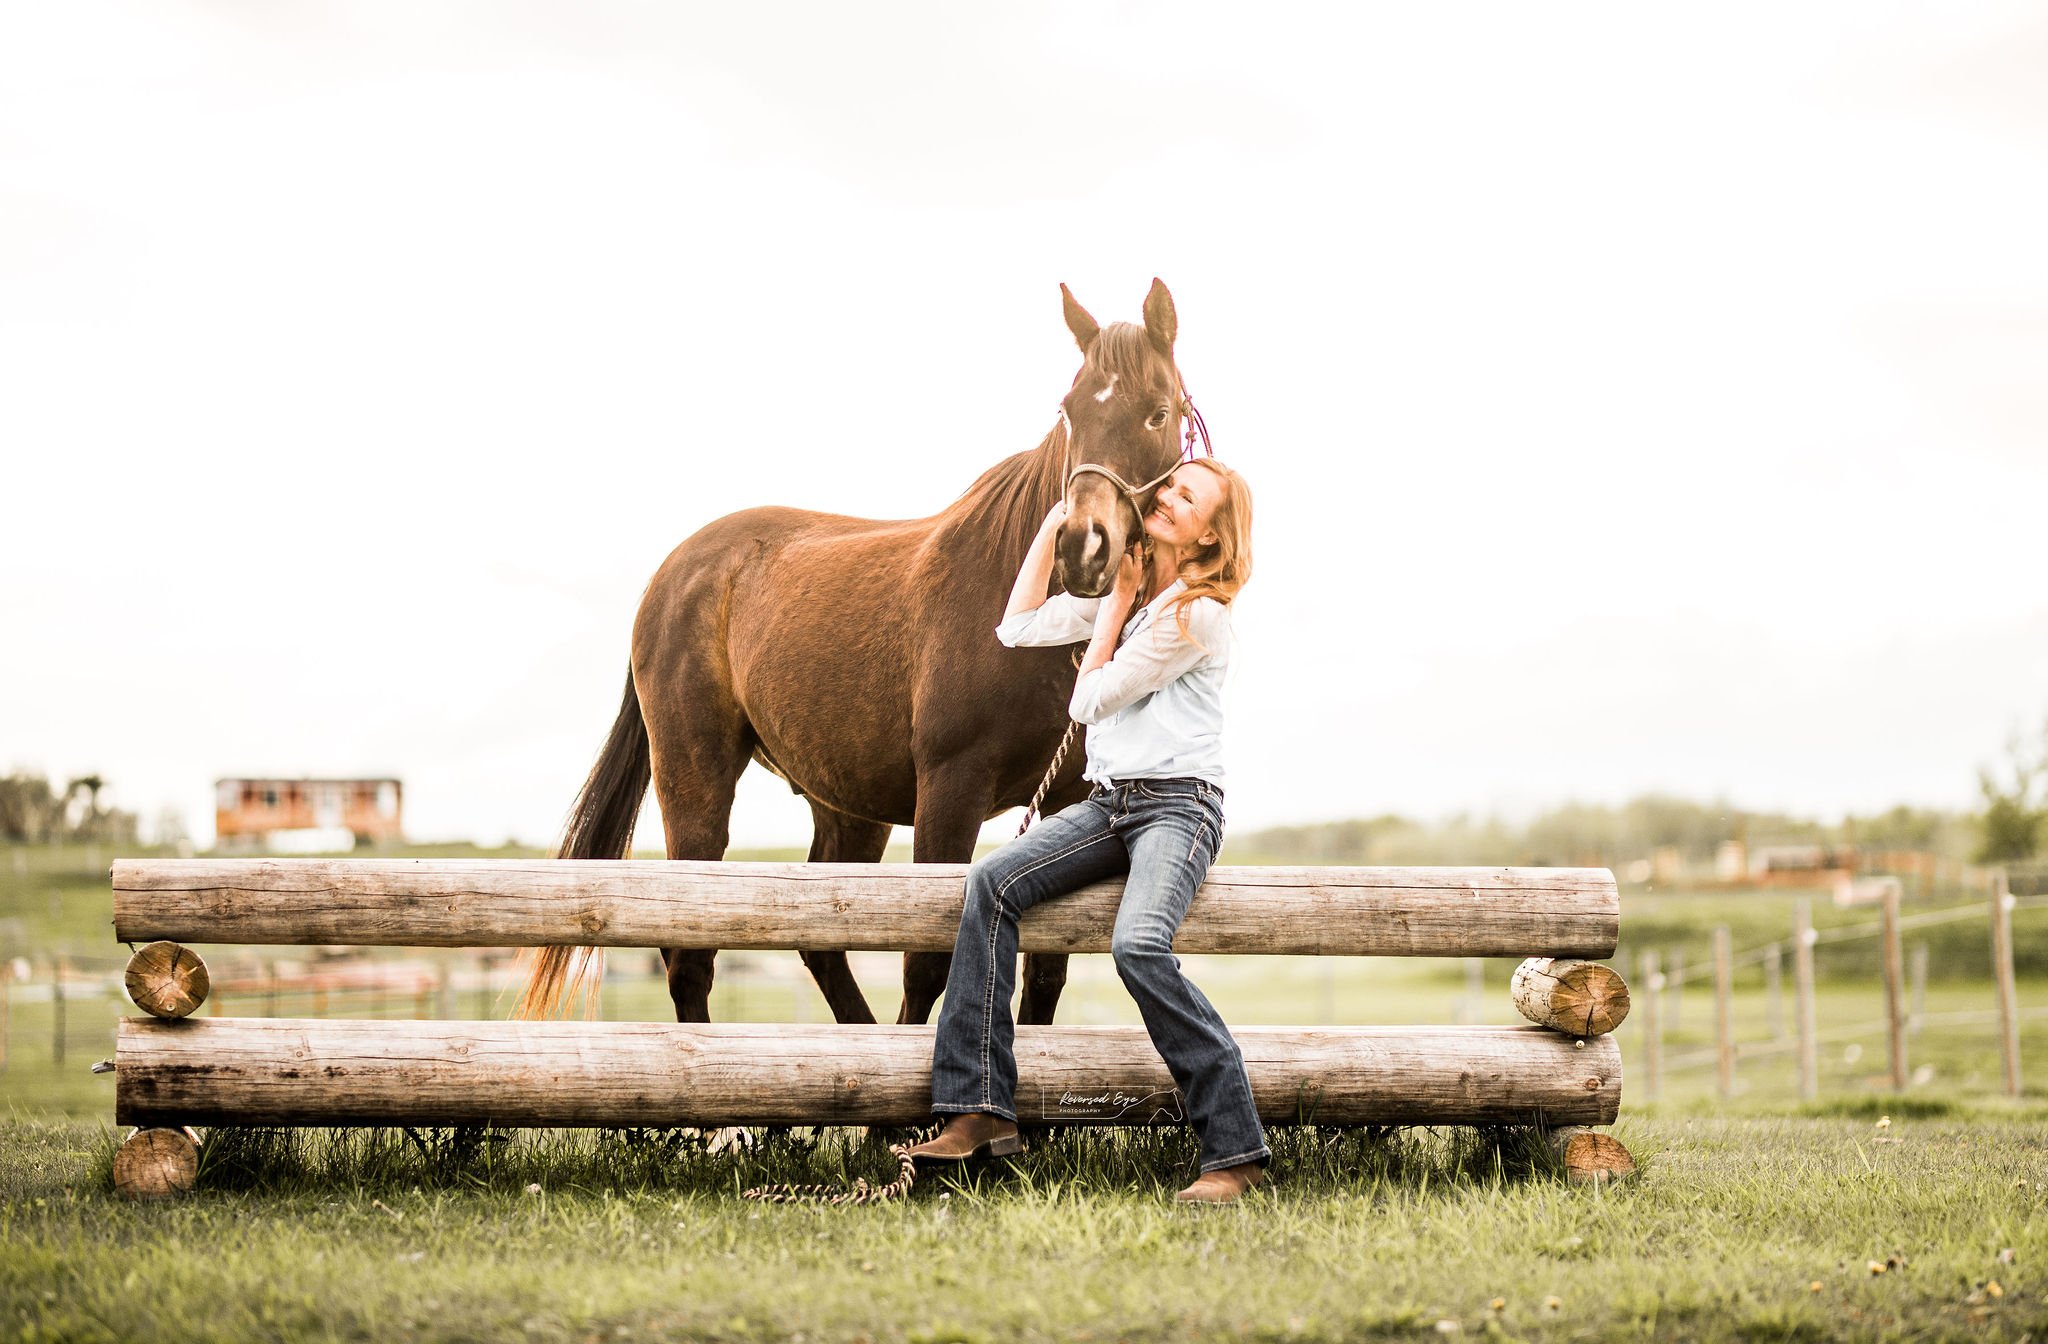 Love between a girl and her horse